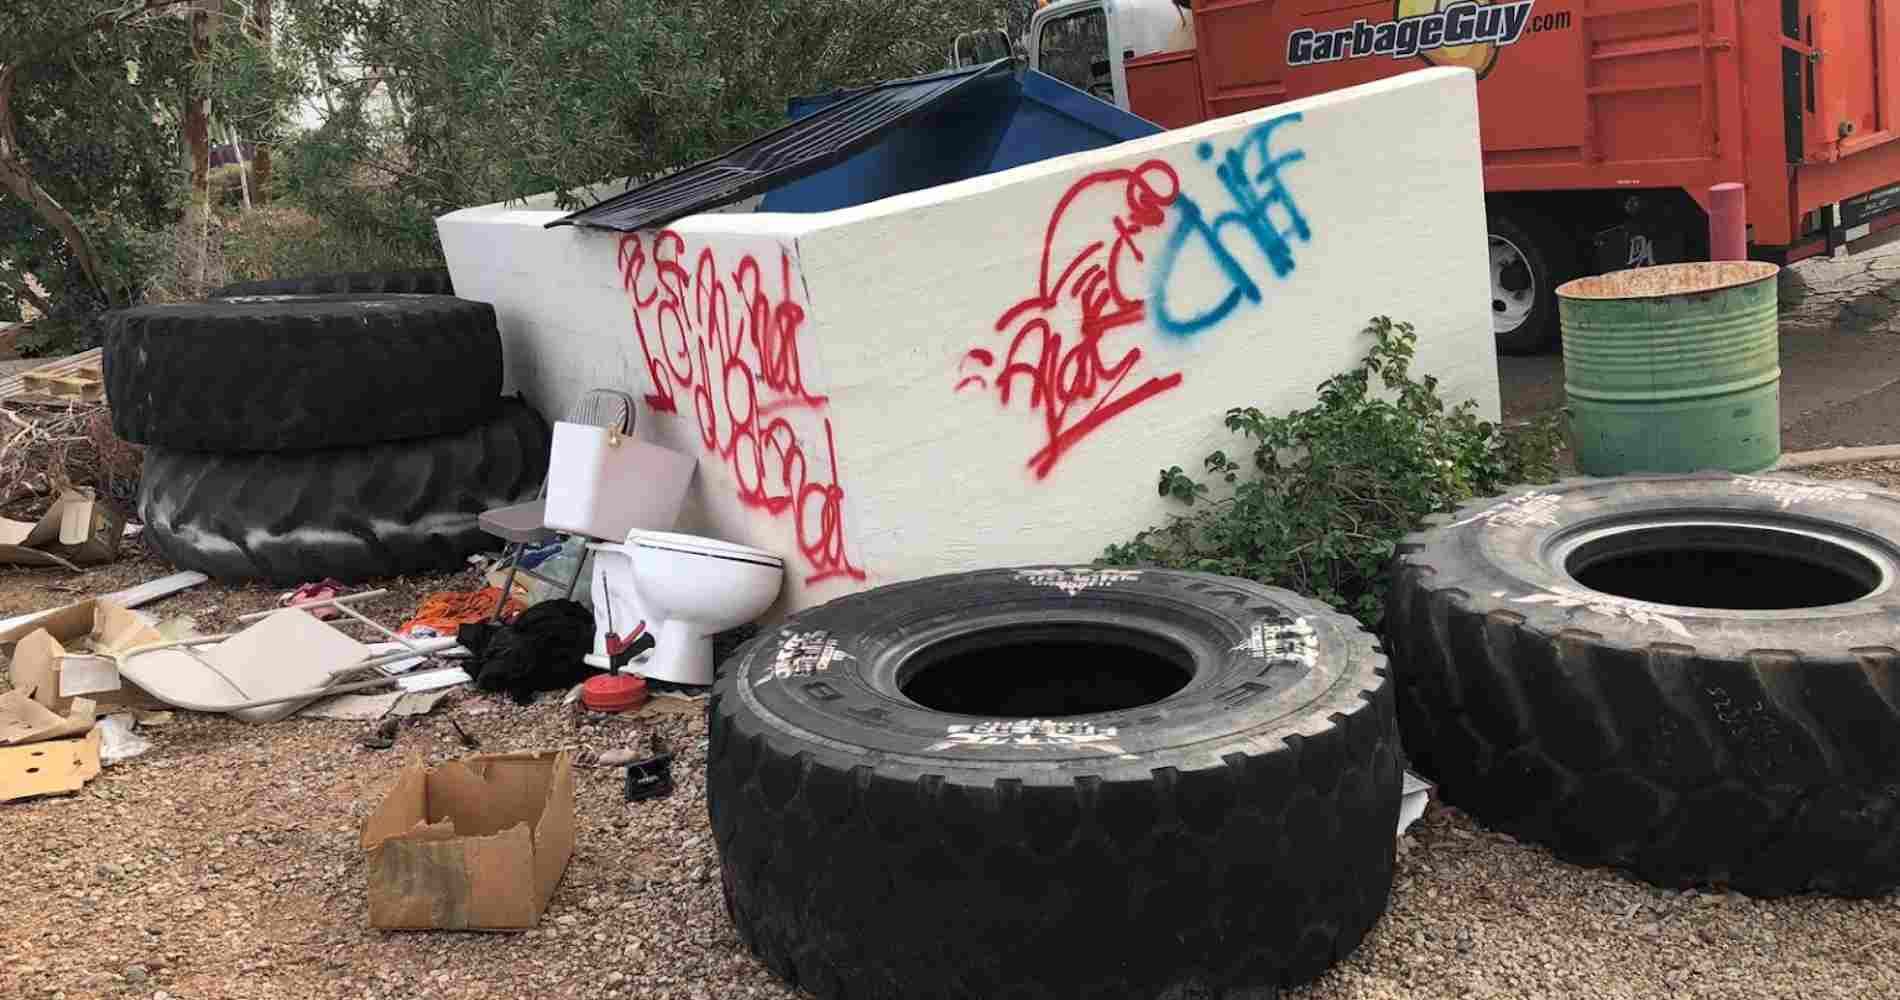 #1 for Tire Disposal in Peoria, AZ with Over 1200 5-Star Reviews!